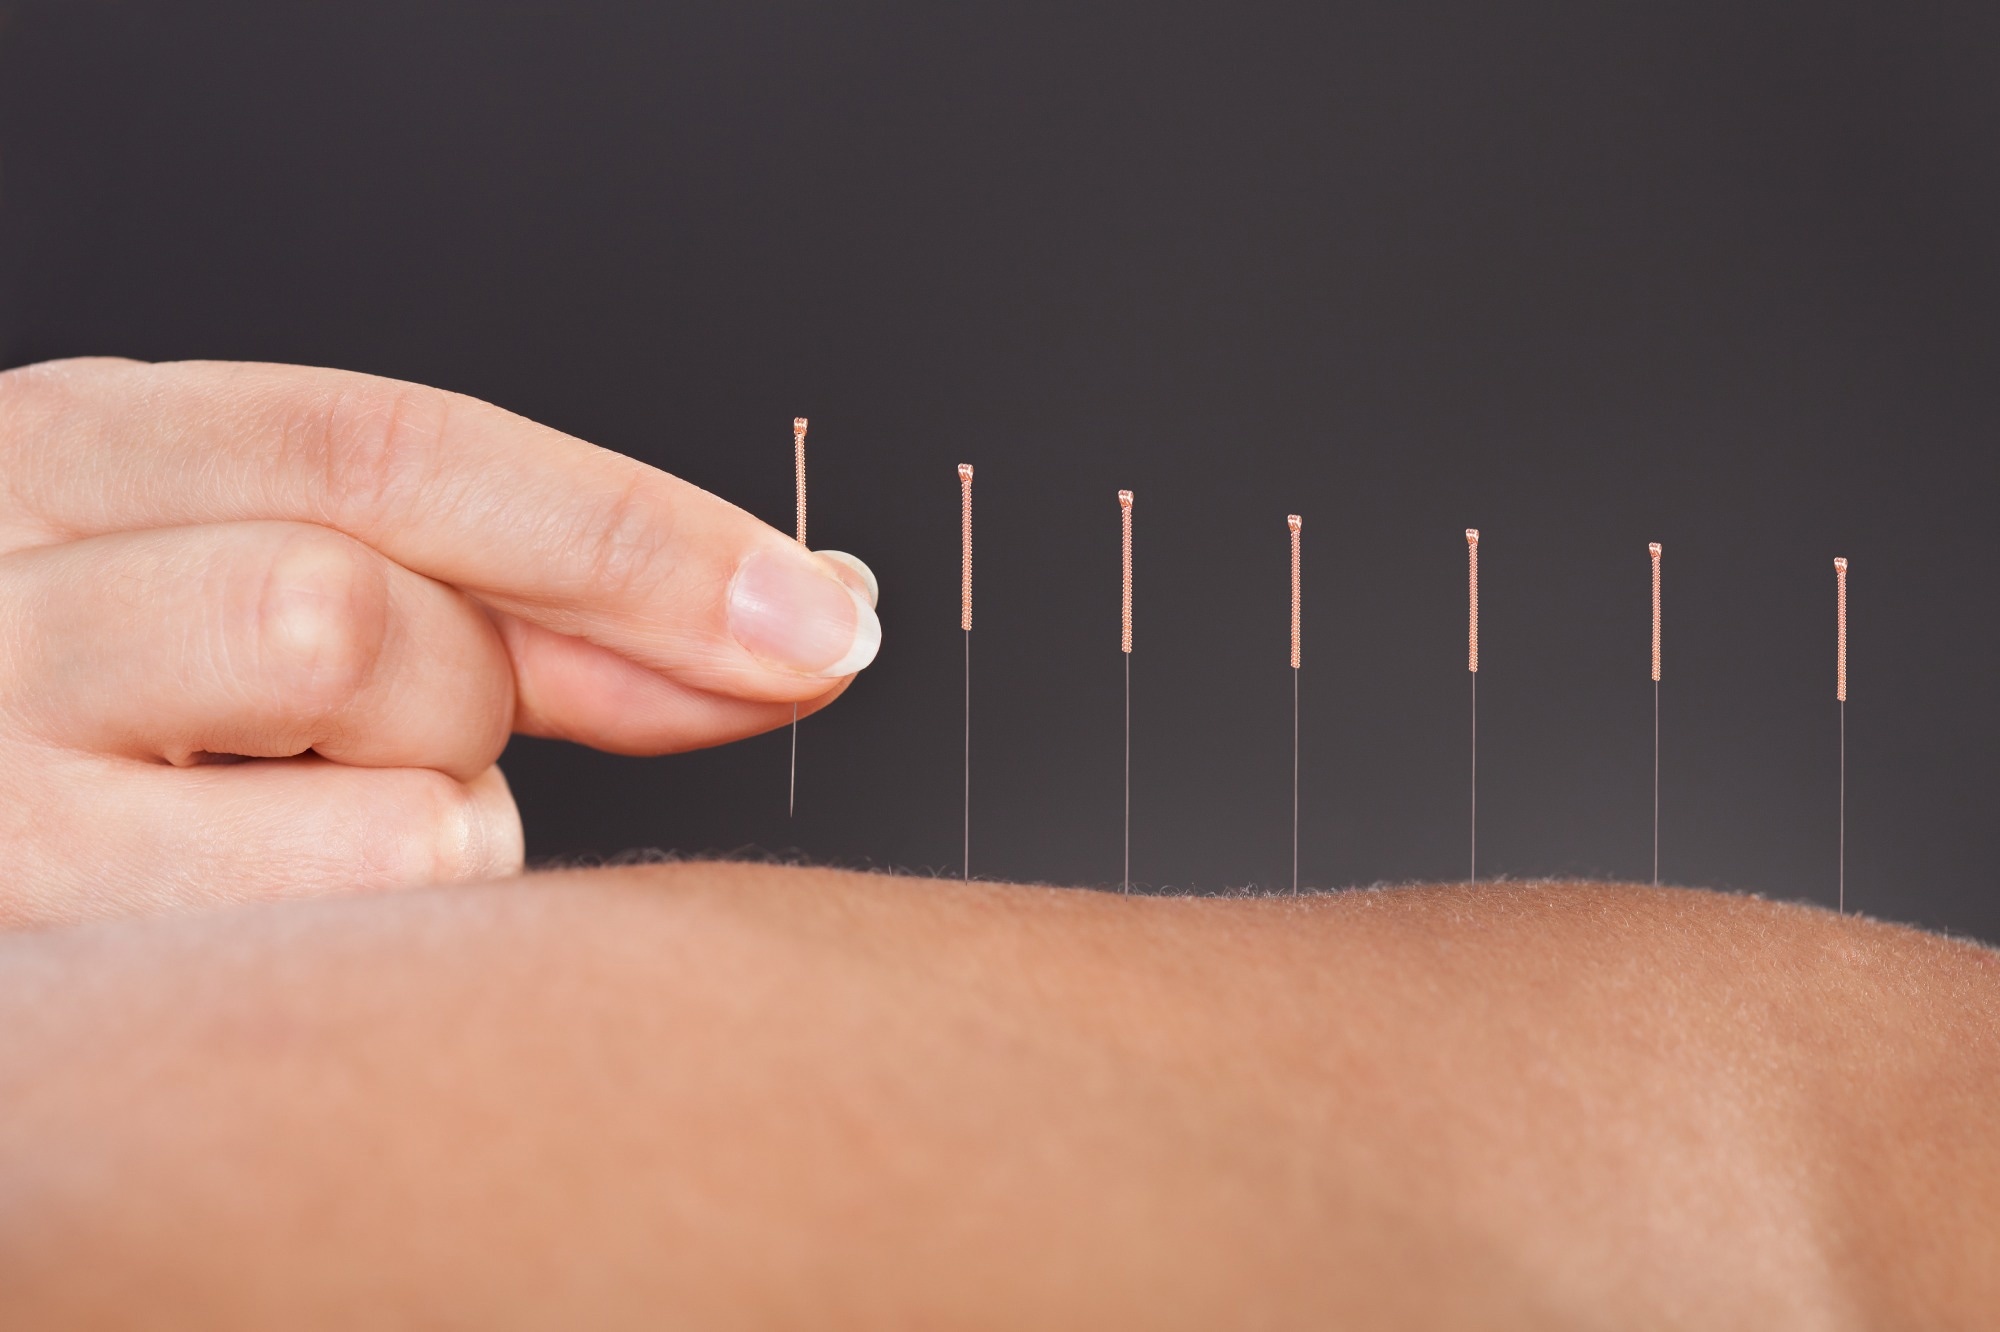 Study: Effect of acupuncture on ischaemic stroke in patients with rheumatoid arthritis: a nationwide propensity scorematched study. Image Credit: Andrey_Popov/Shutterstock.com